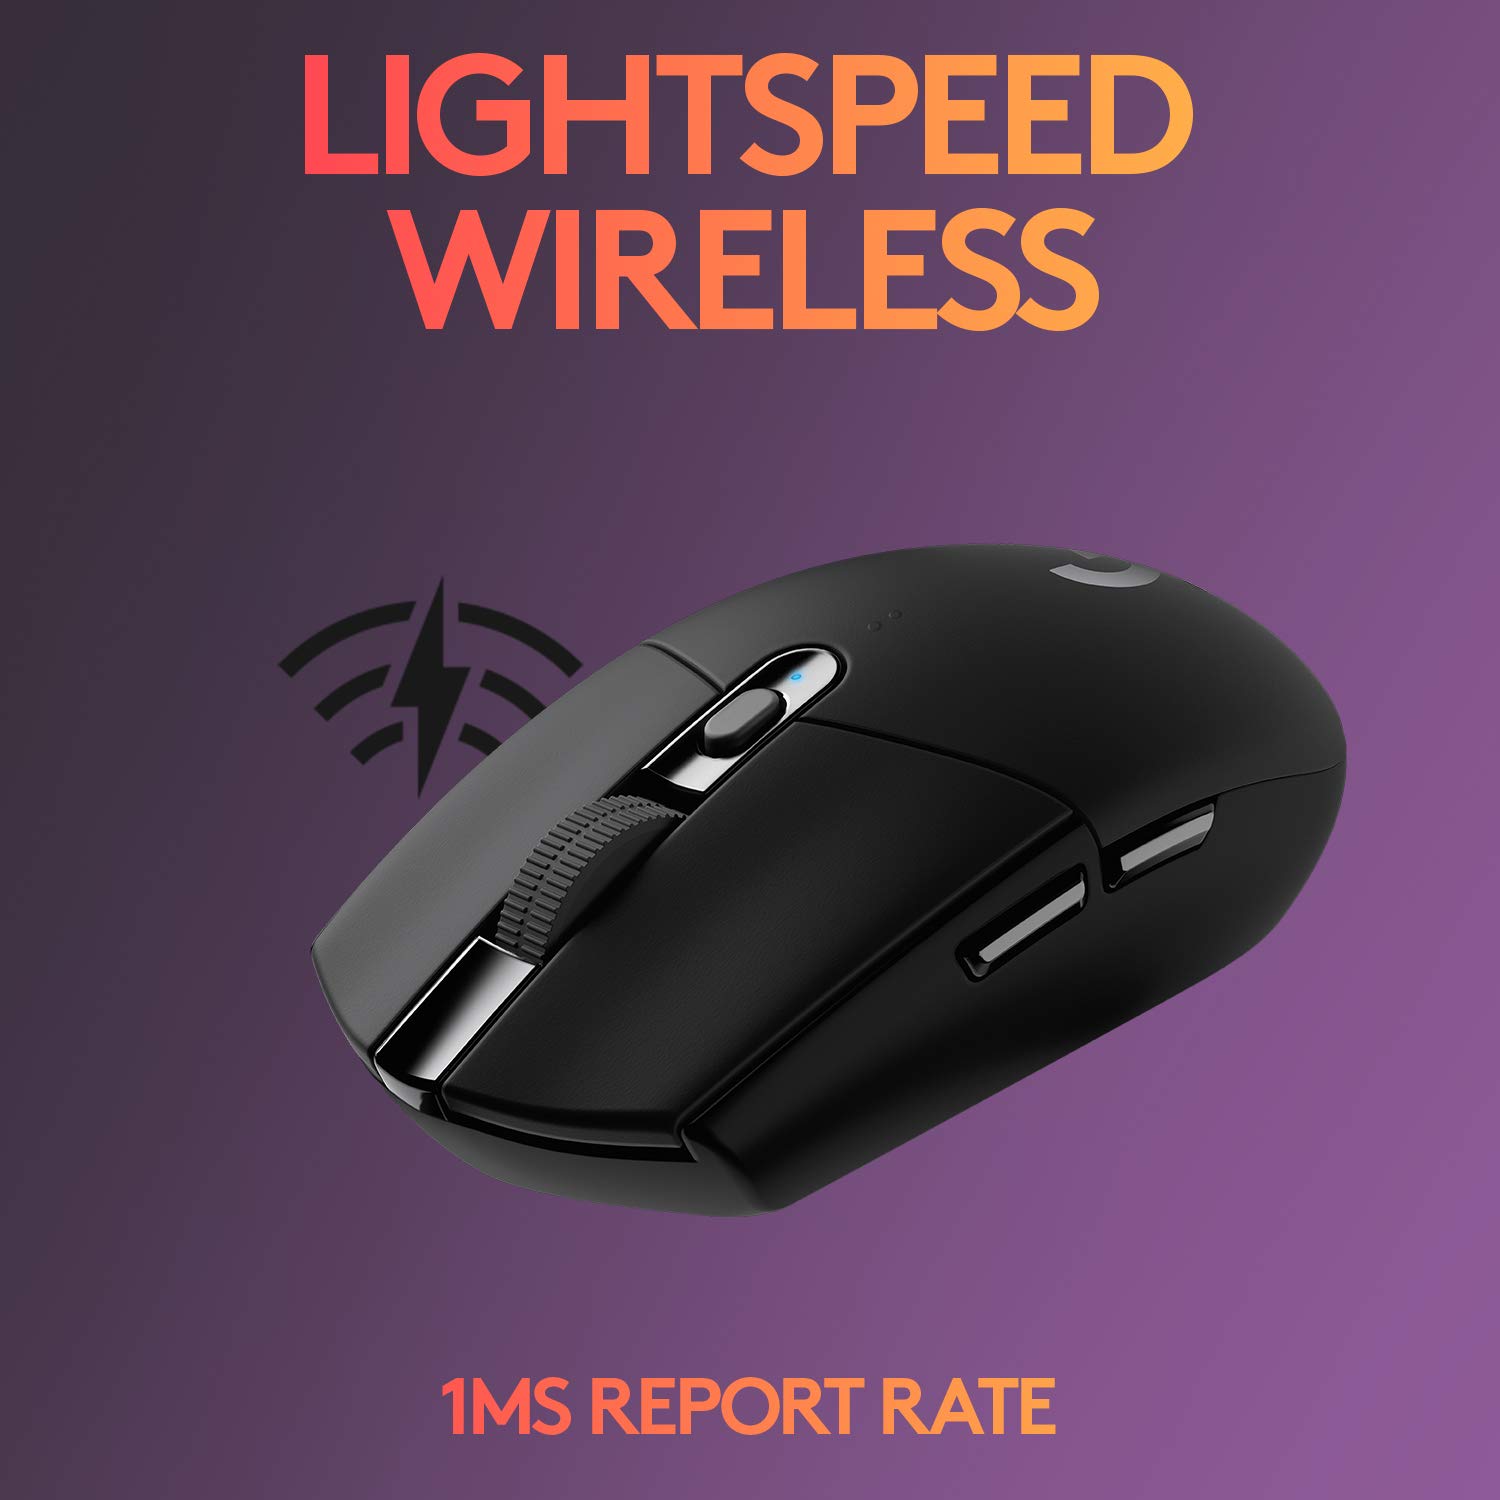 Ultra-fast LIGHTSPEED Wireless technology gives you a lag-free gaming experience. G304 delivers incredible responsiveness and reliability with a super fast 1 ms report rate for competition-level performance.